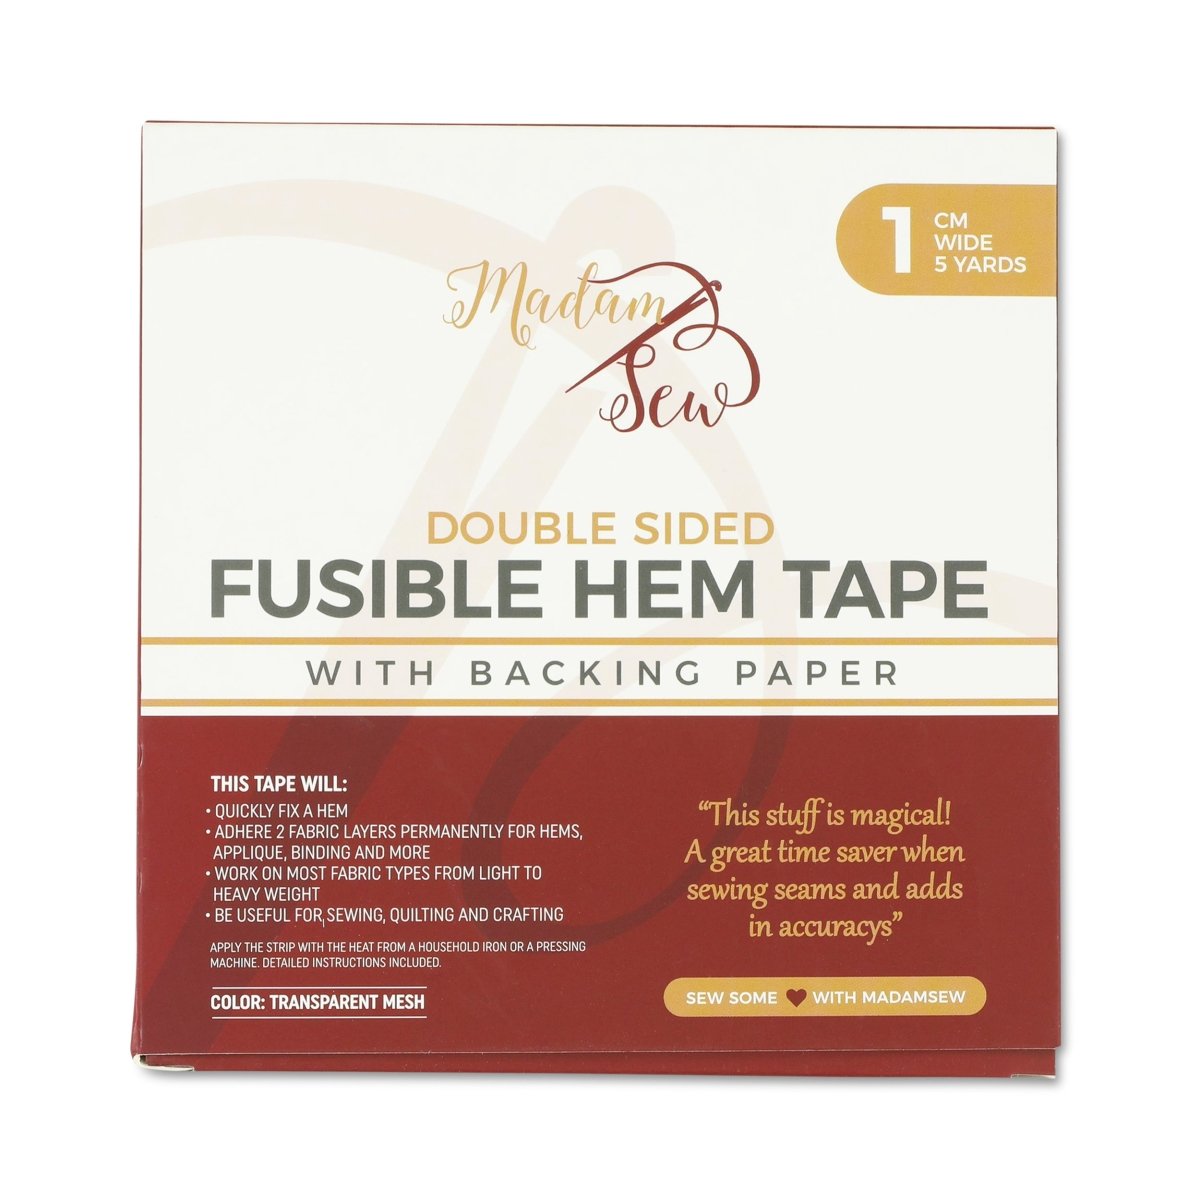 Self-Adhesive Paste for Pant Quick No Sew Hemming Iron on Pants Hem  Clothing Tape Iron Fabric Tape for Hemming DIY Sewing Fabric